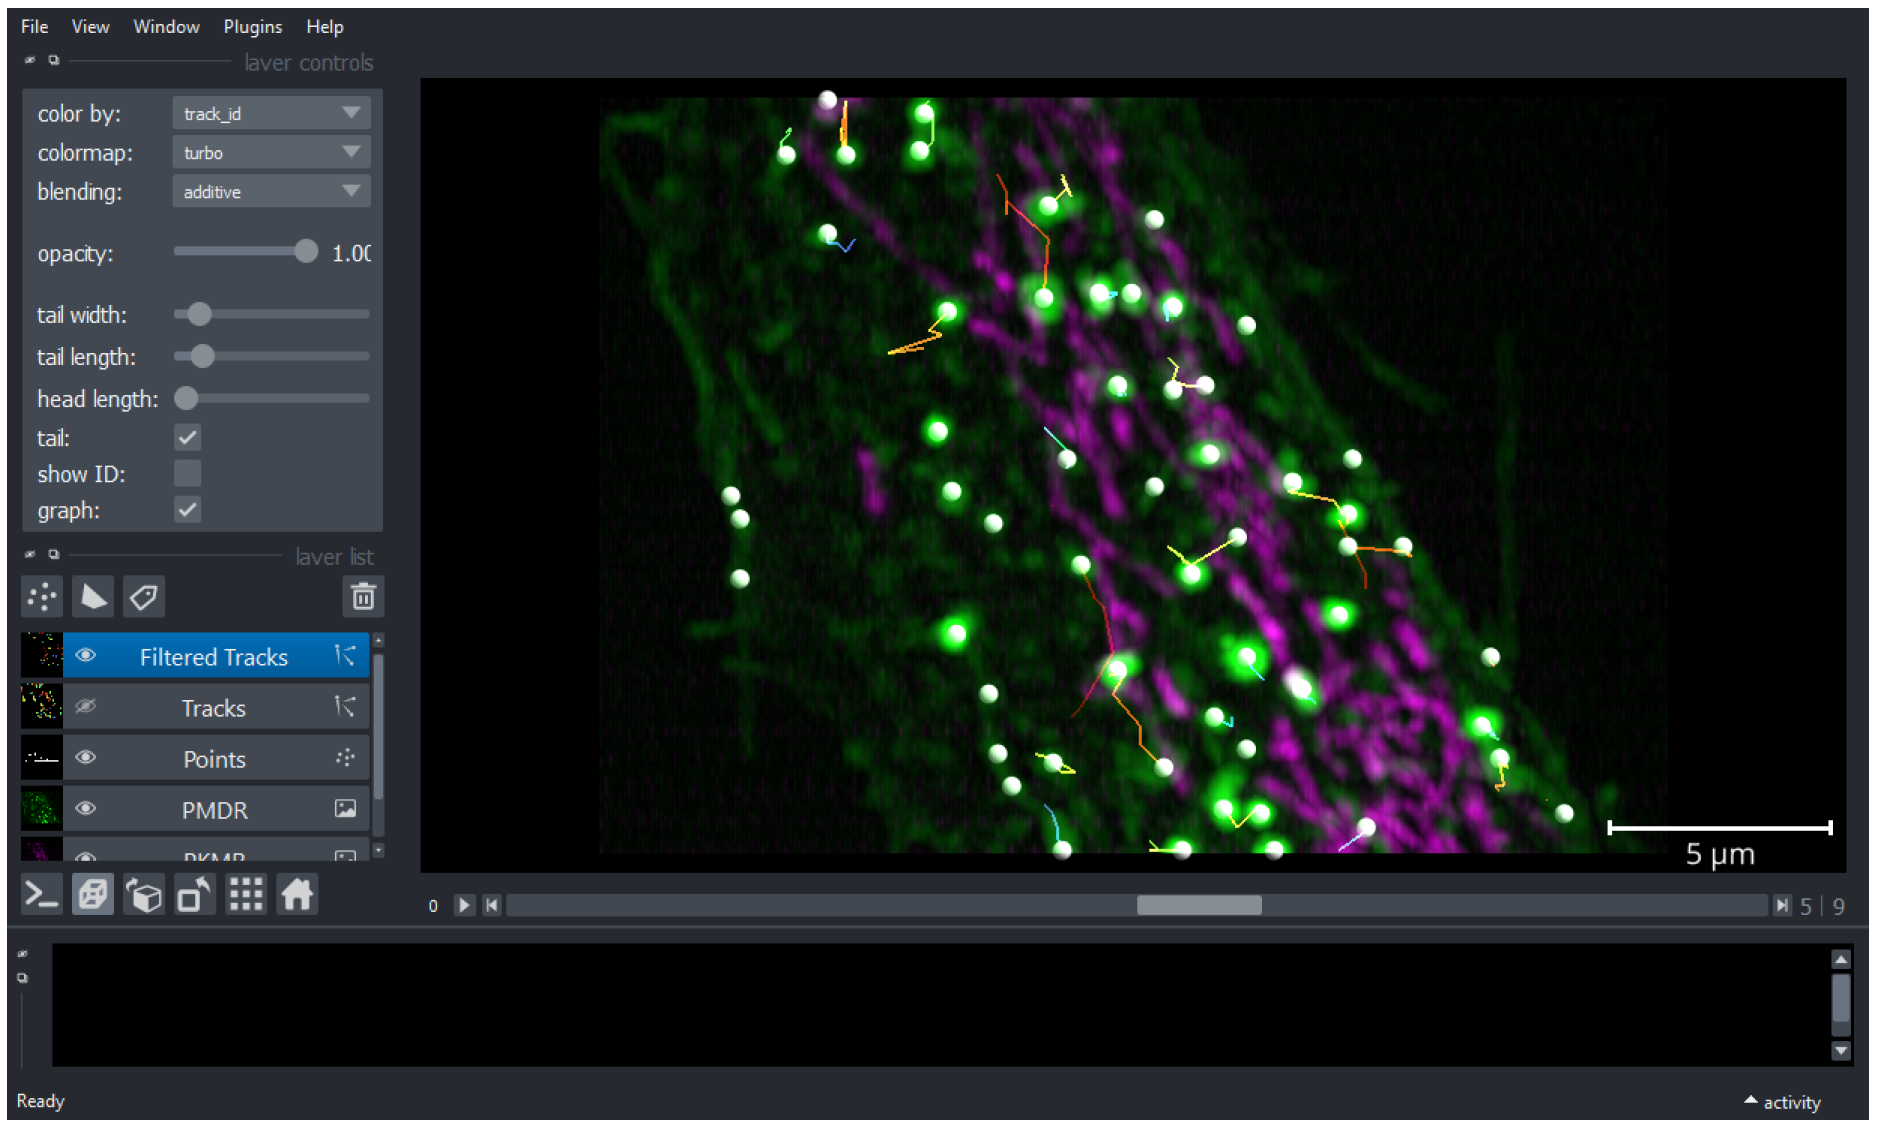 STracking library implemented in its napari plugin. Fifty-five planes 3D volumes of live RPE1 cells double stained with PKMR for Mitochondria (magenta) and with plasma membrane deep red (PMDR) for endosomal pathway (green) were acquired within 4.3 s per stack using Lattice light-sheet Structure Illumination Microscopy (LLS-SIM). STracking is illustrated here with single particle tracking of endosomal pathway (PMDR). 3D data and tracks are rendered using napari viewer.